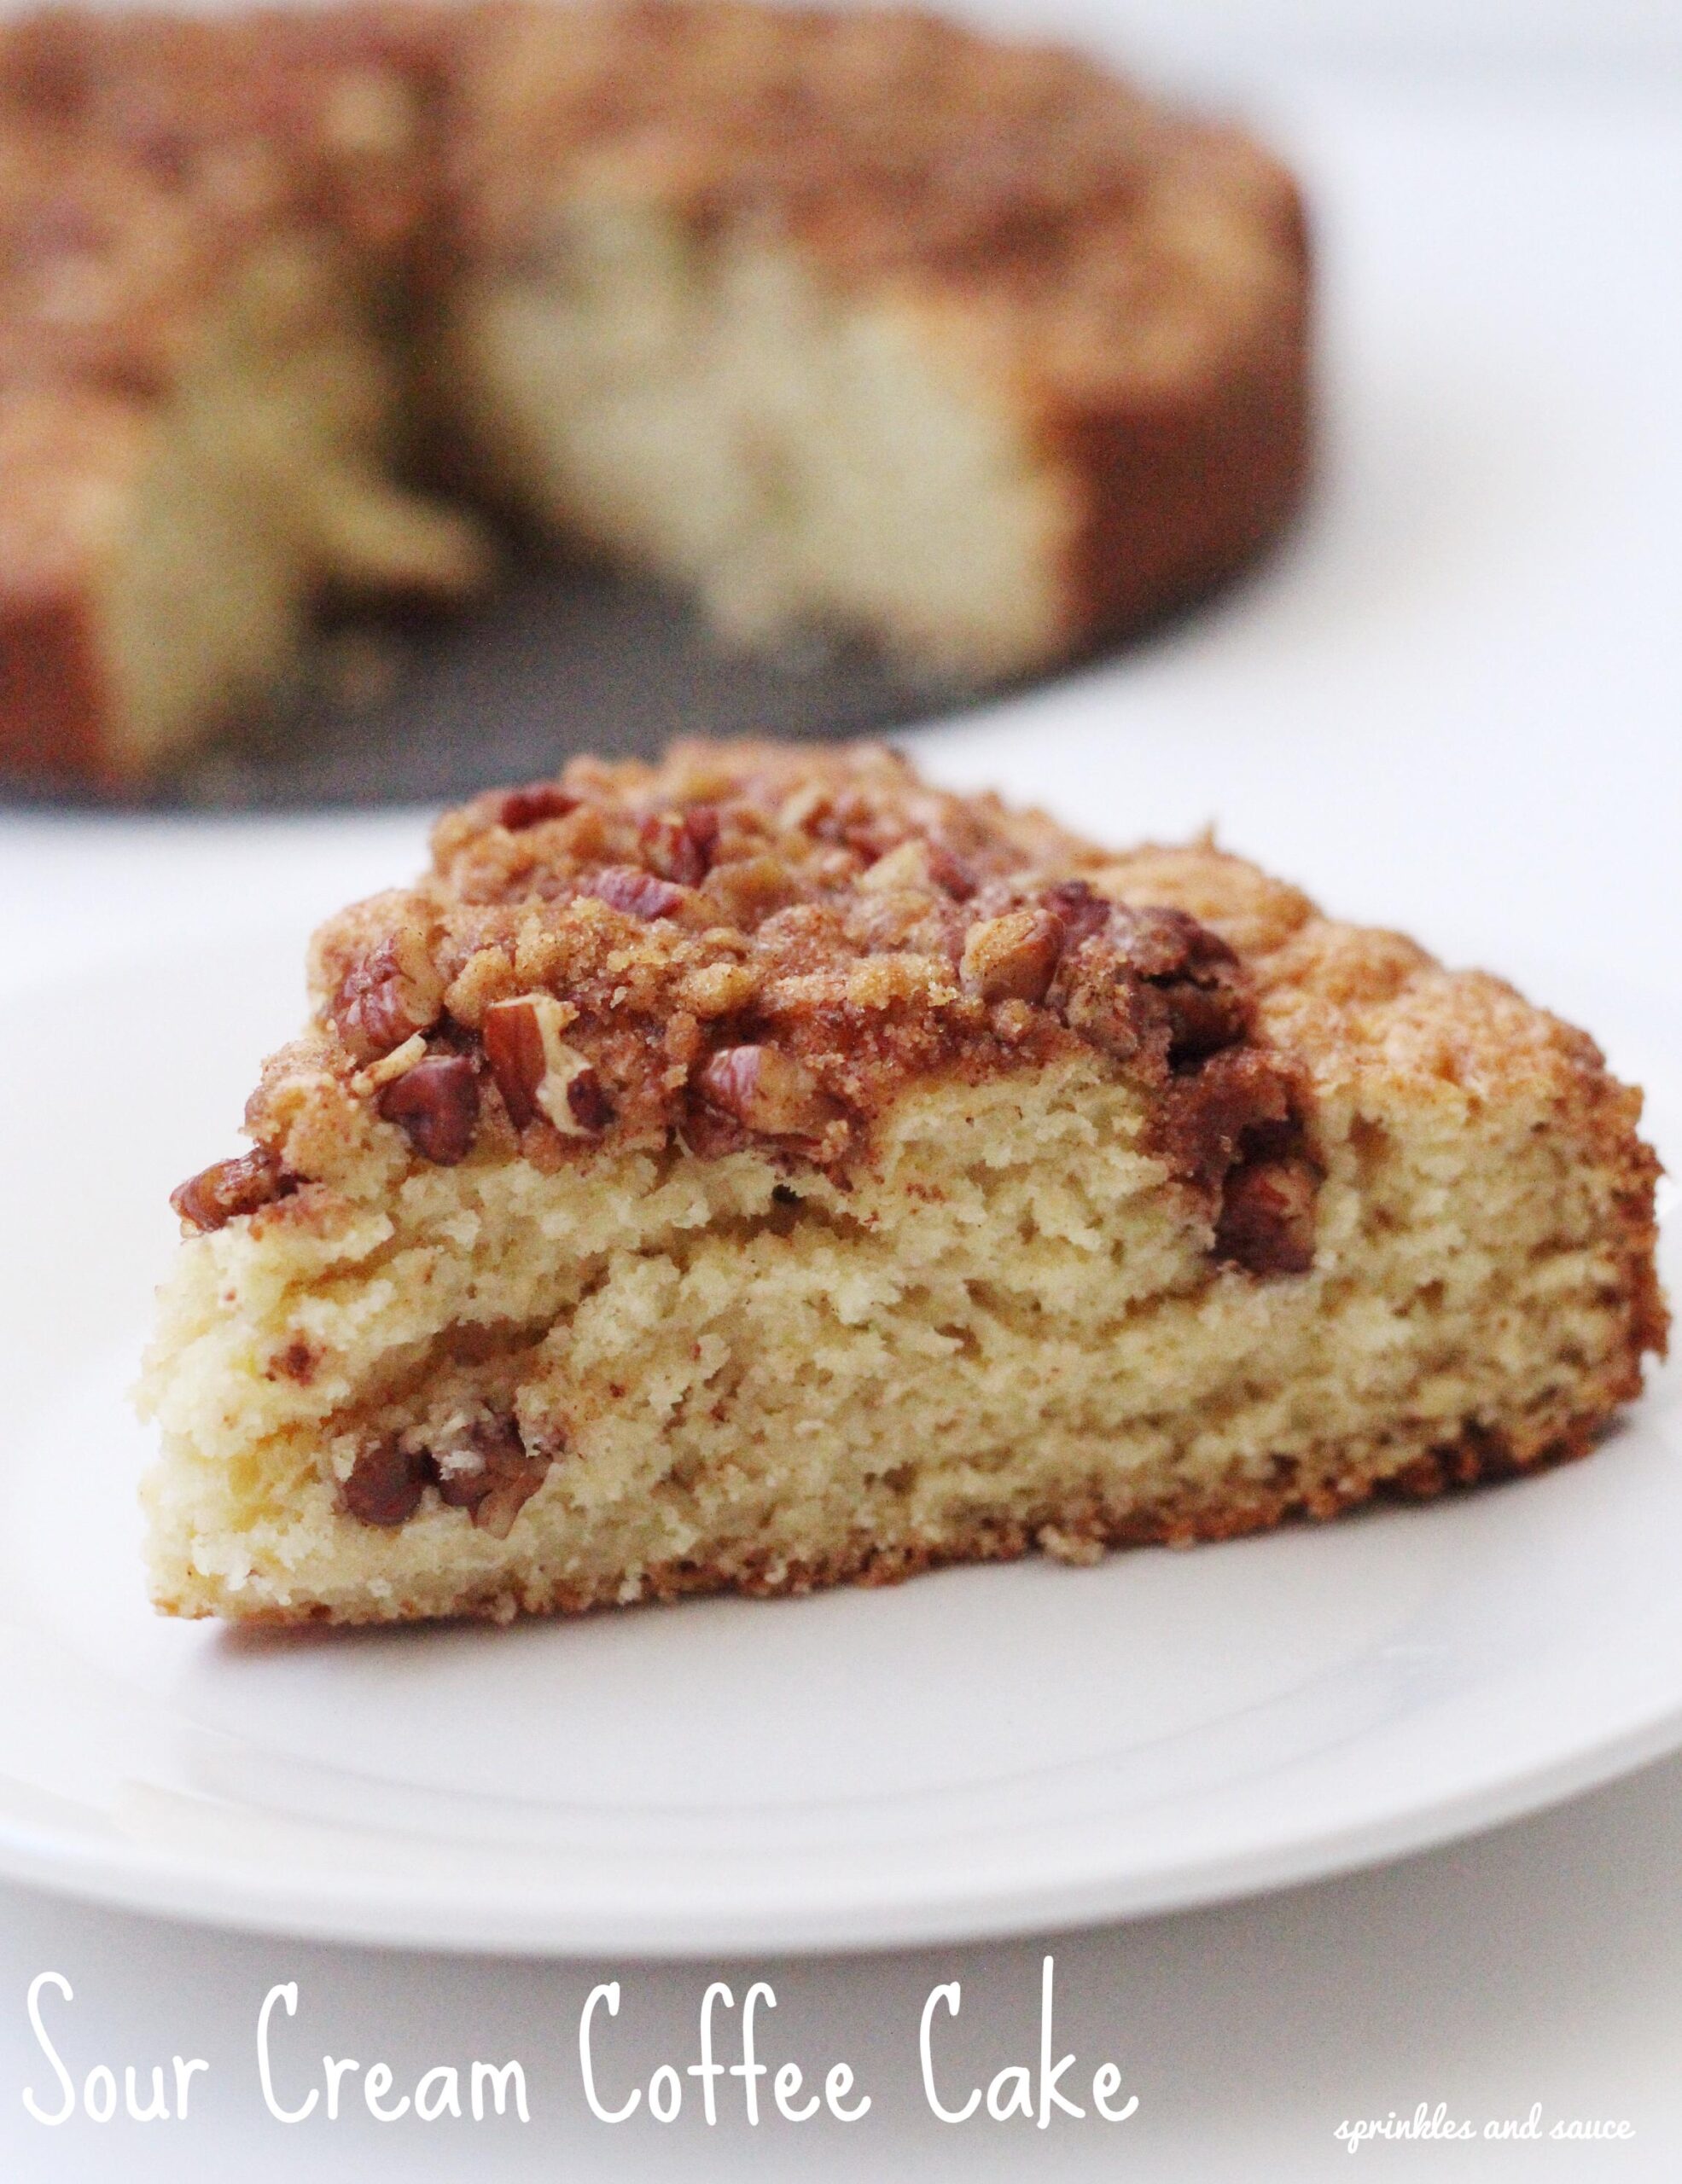  One bite and you'll be hooked on this Brown Butter Ginger and Sour Cream Coffee Cake.